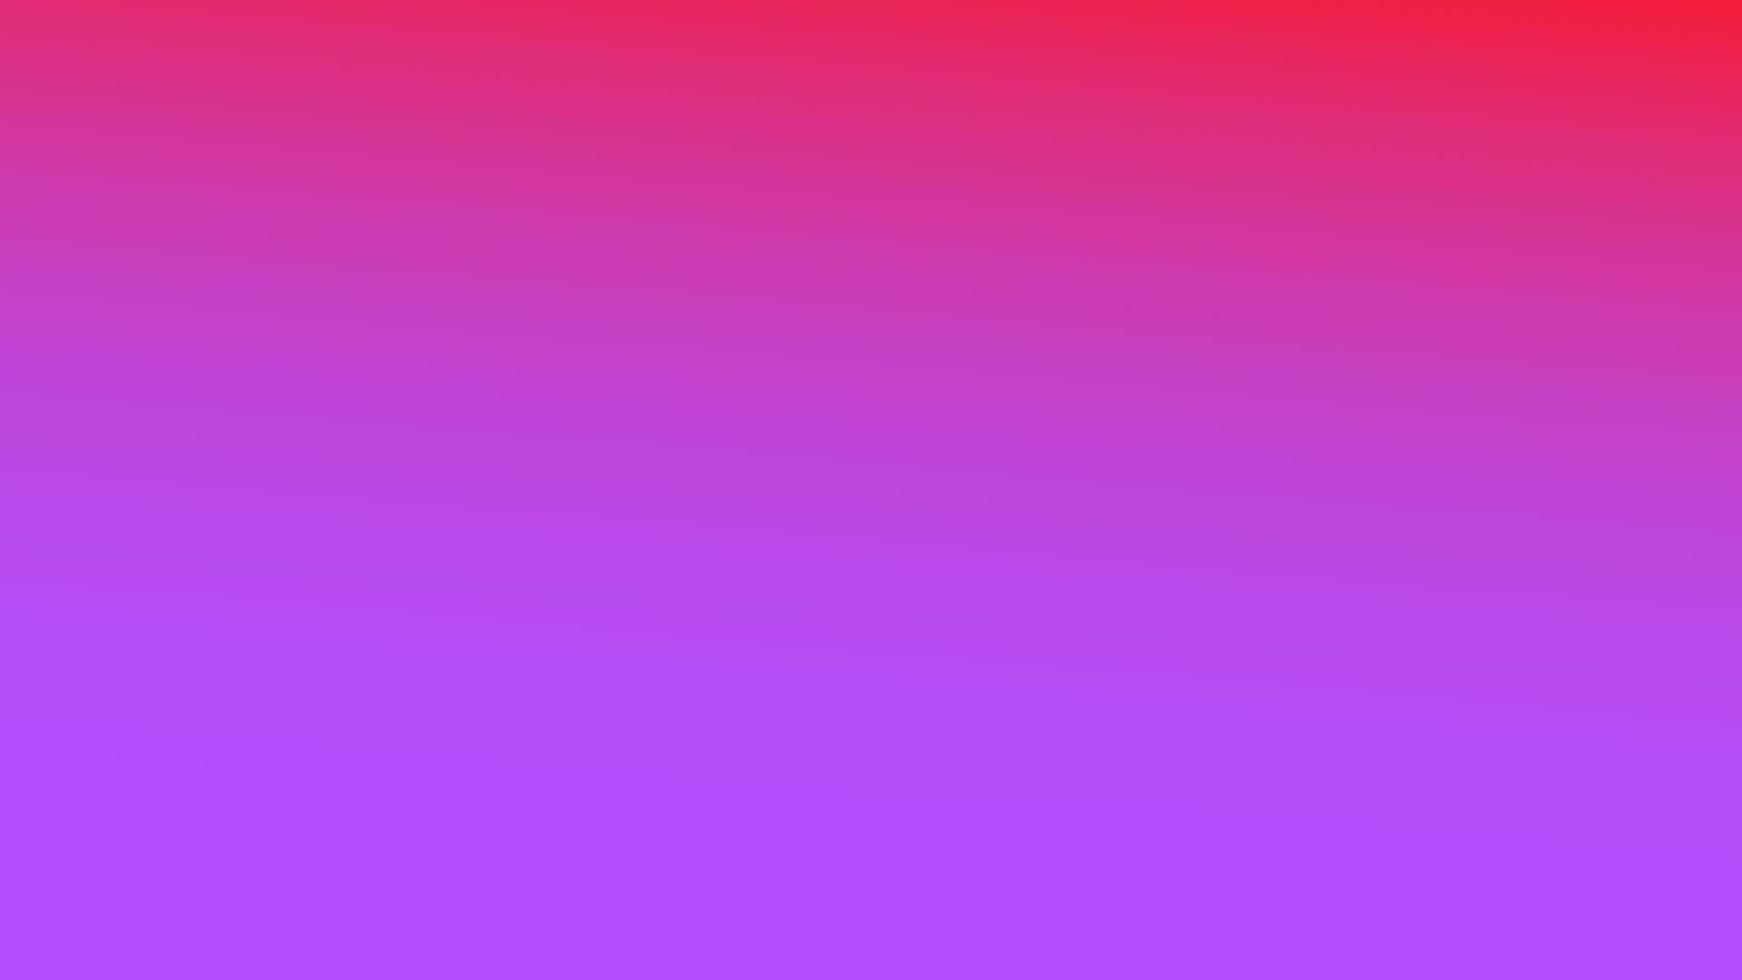 aesthetic colorful red and purple gradient background illustration, perfect for wallpaper, background, backdrop, banner vector